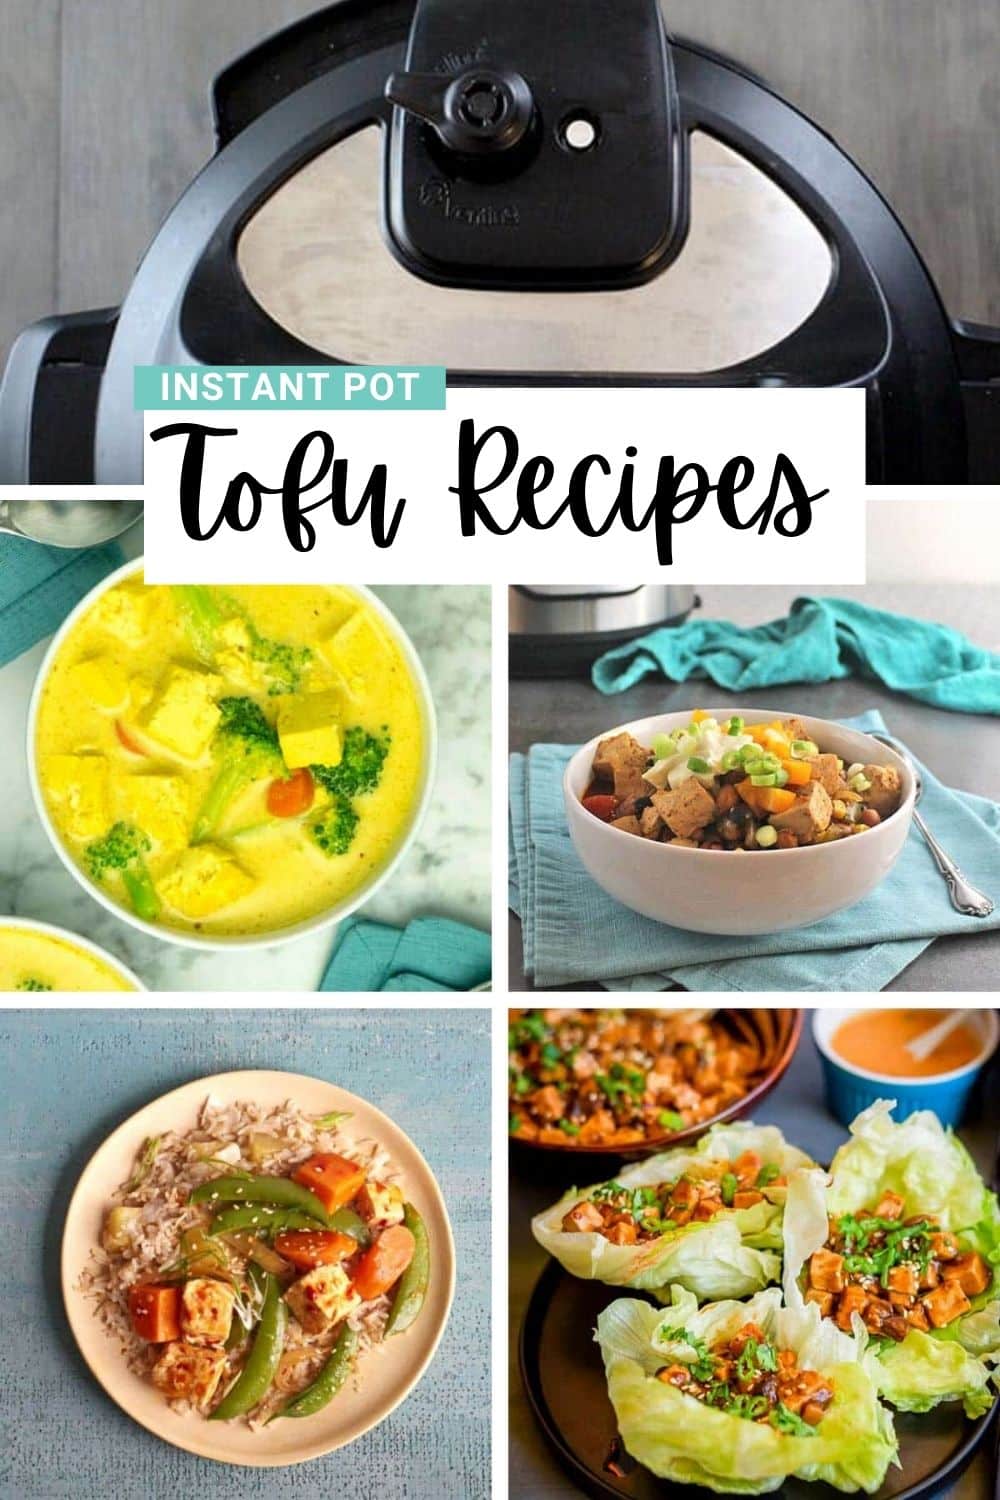 image text reads: Instant Pot Tofu Recipes over a collage of an Instant Pot lid and different cooked dishes